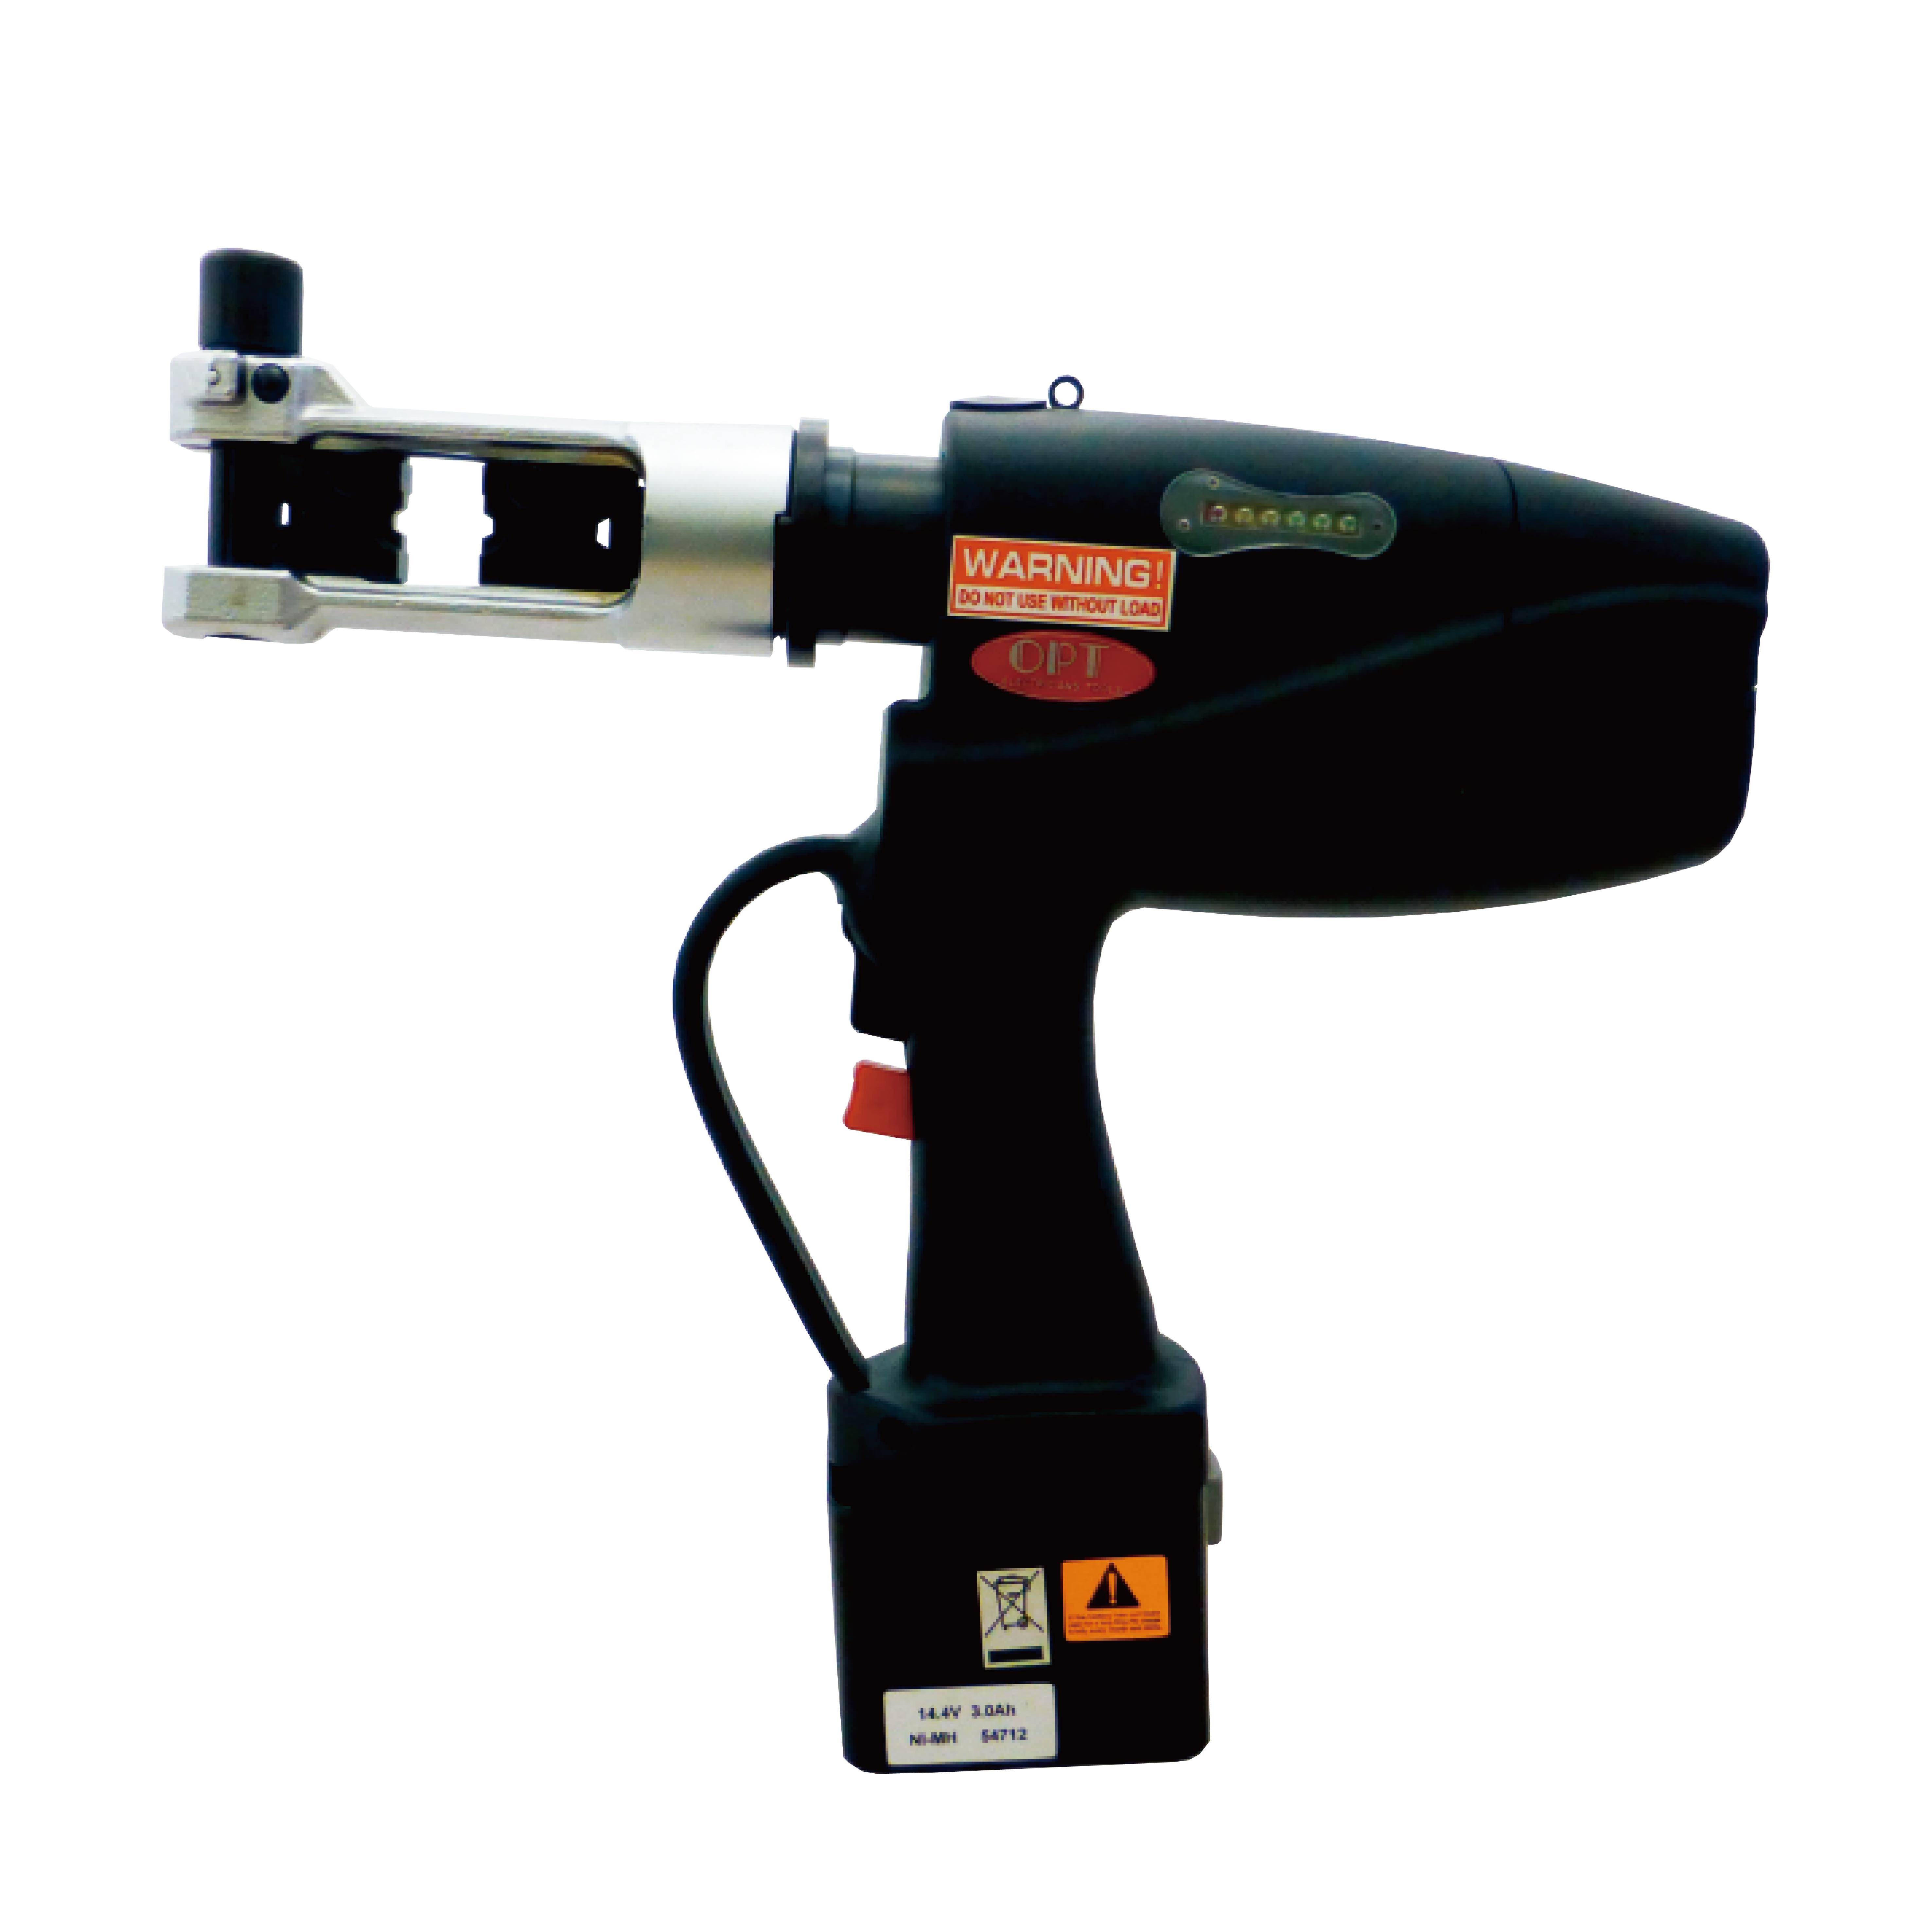 EPL-80 CORDLESS HYDRAULIC CRIMPING TOOLS-EPL-80